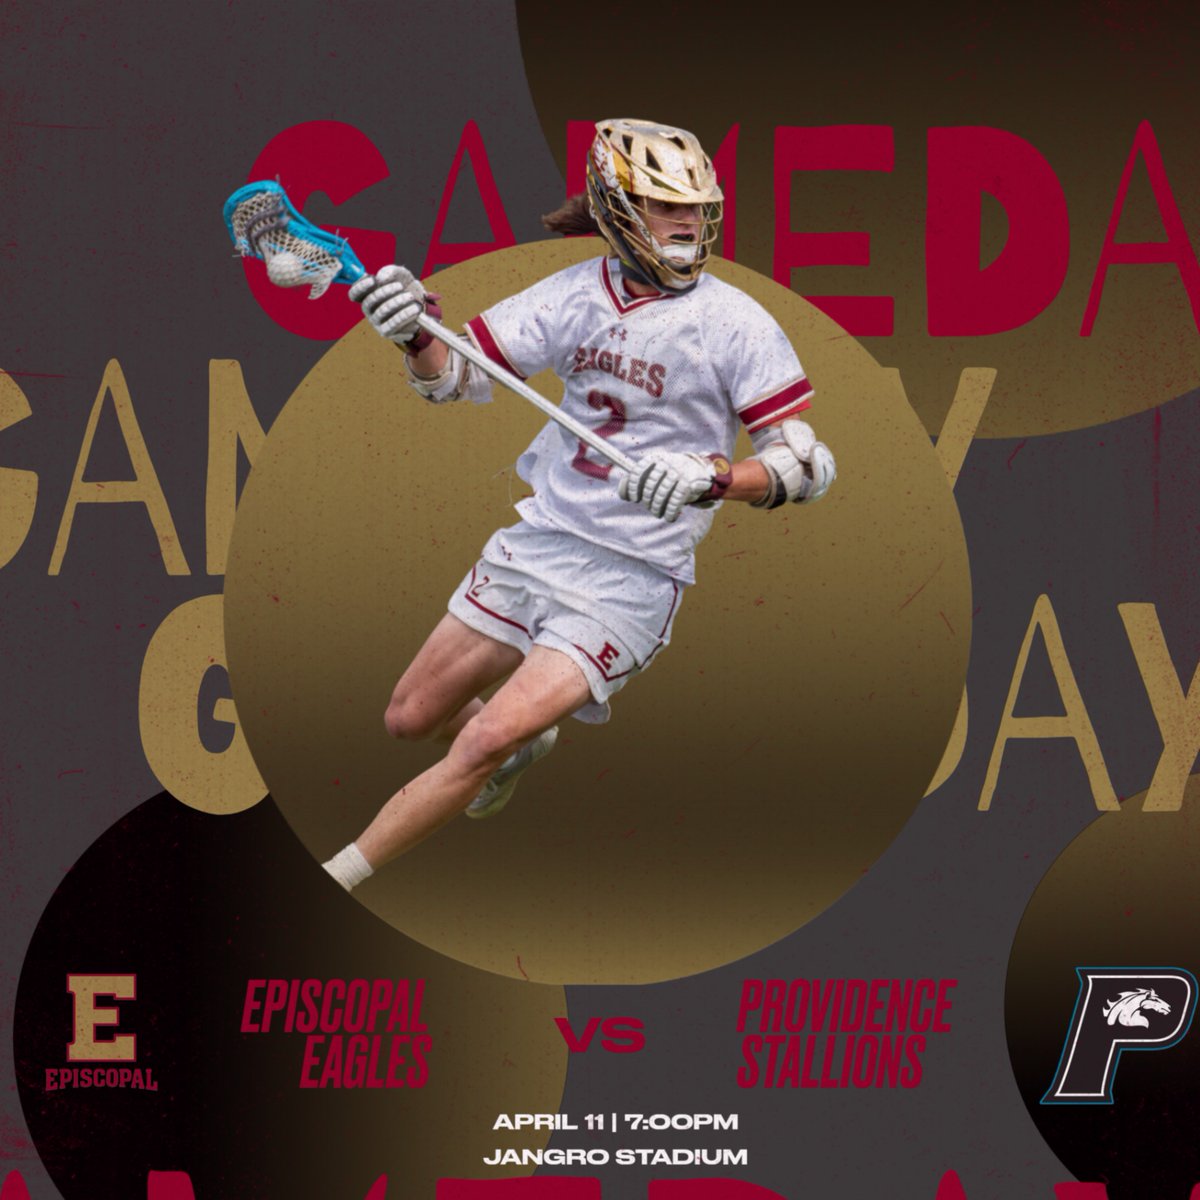 Head out to Jangro Stadium tonight to catch the Boys Lacrosse team in District Semifinal action against the Providence Stallions!! 7pm game time!